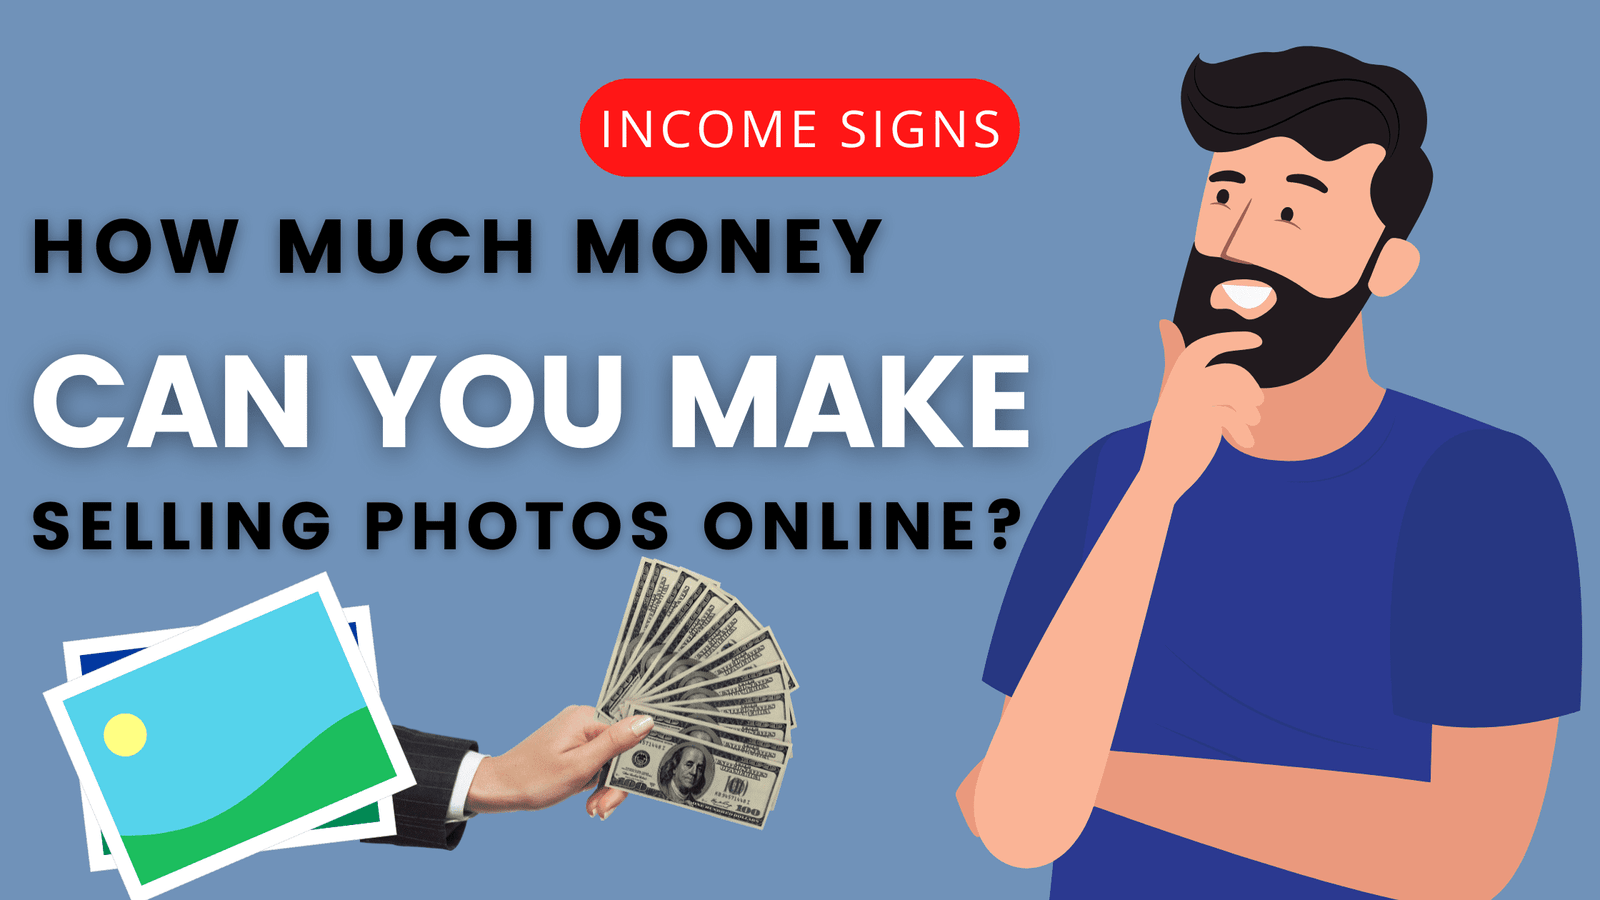 How Much Money Can You Make Selling Photos Online